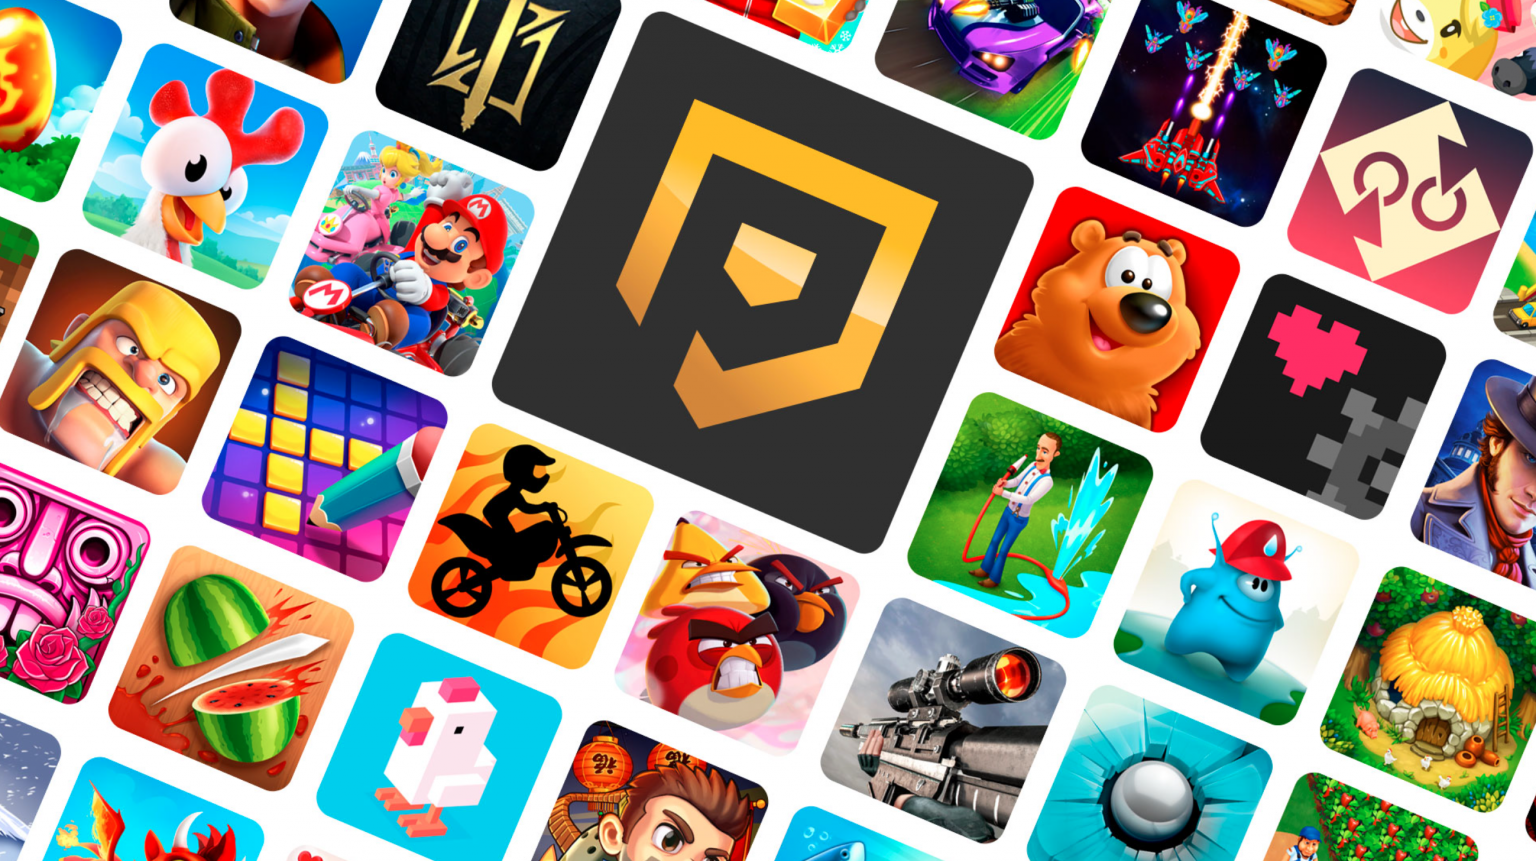 5 TOP Mobile Game Apps on Google Play Store